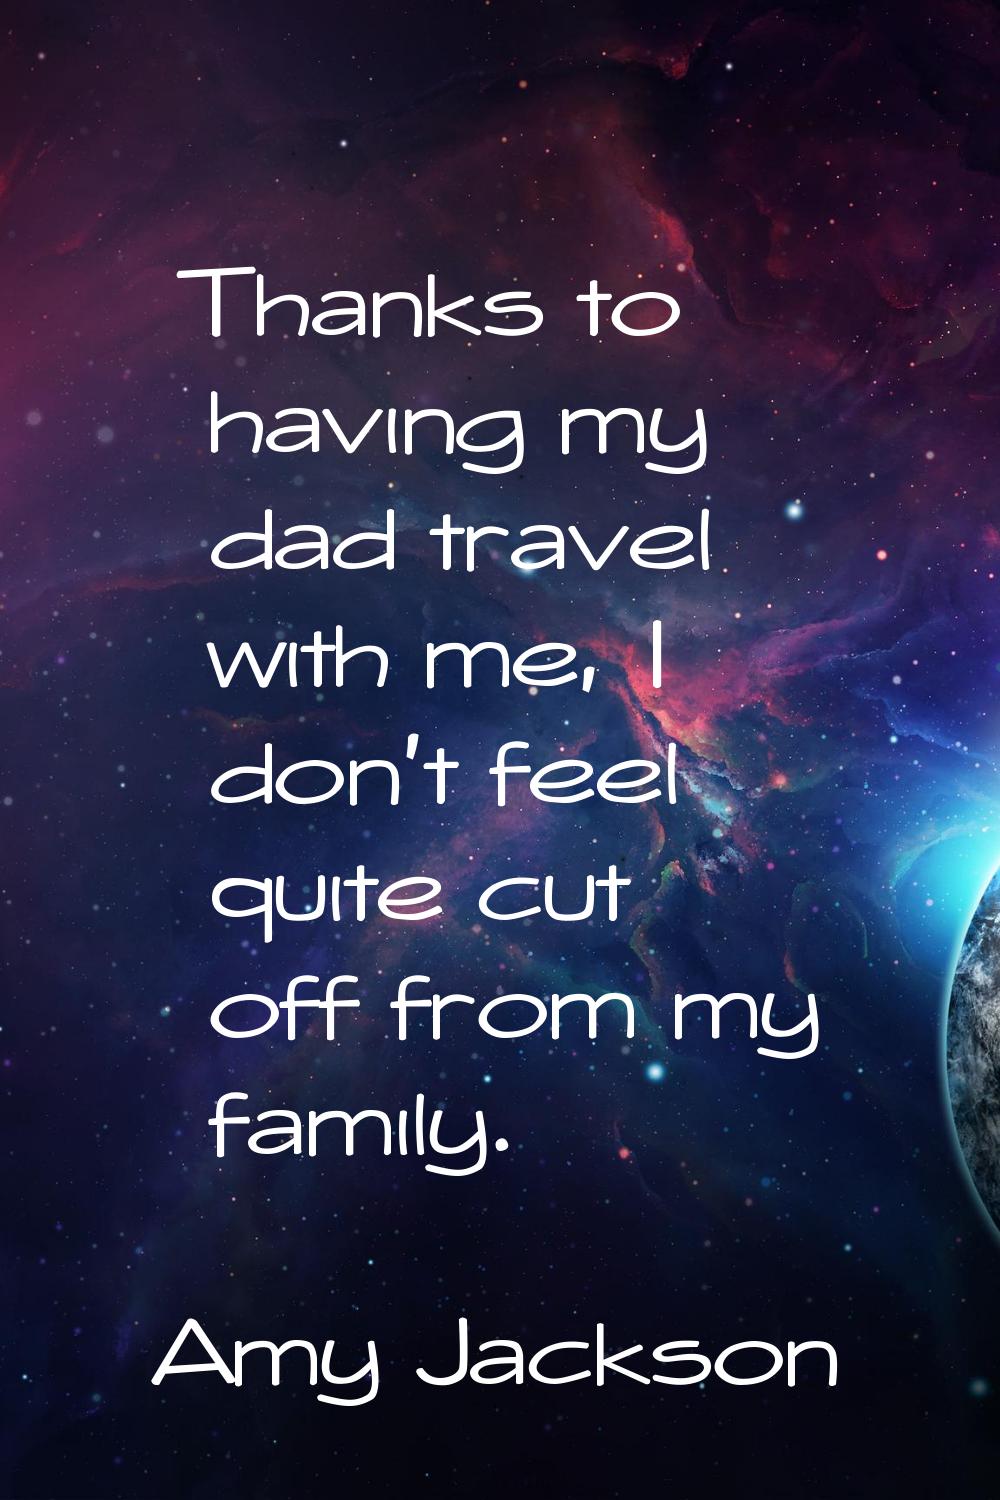 Thanks to having my dad travel with me, I don't feel quite cut off from my family.